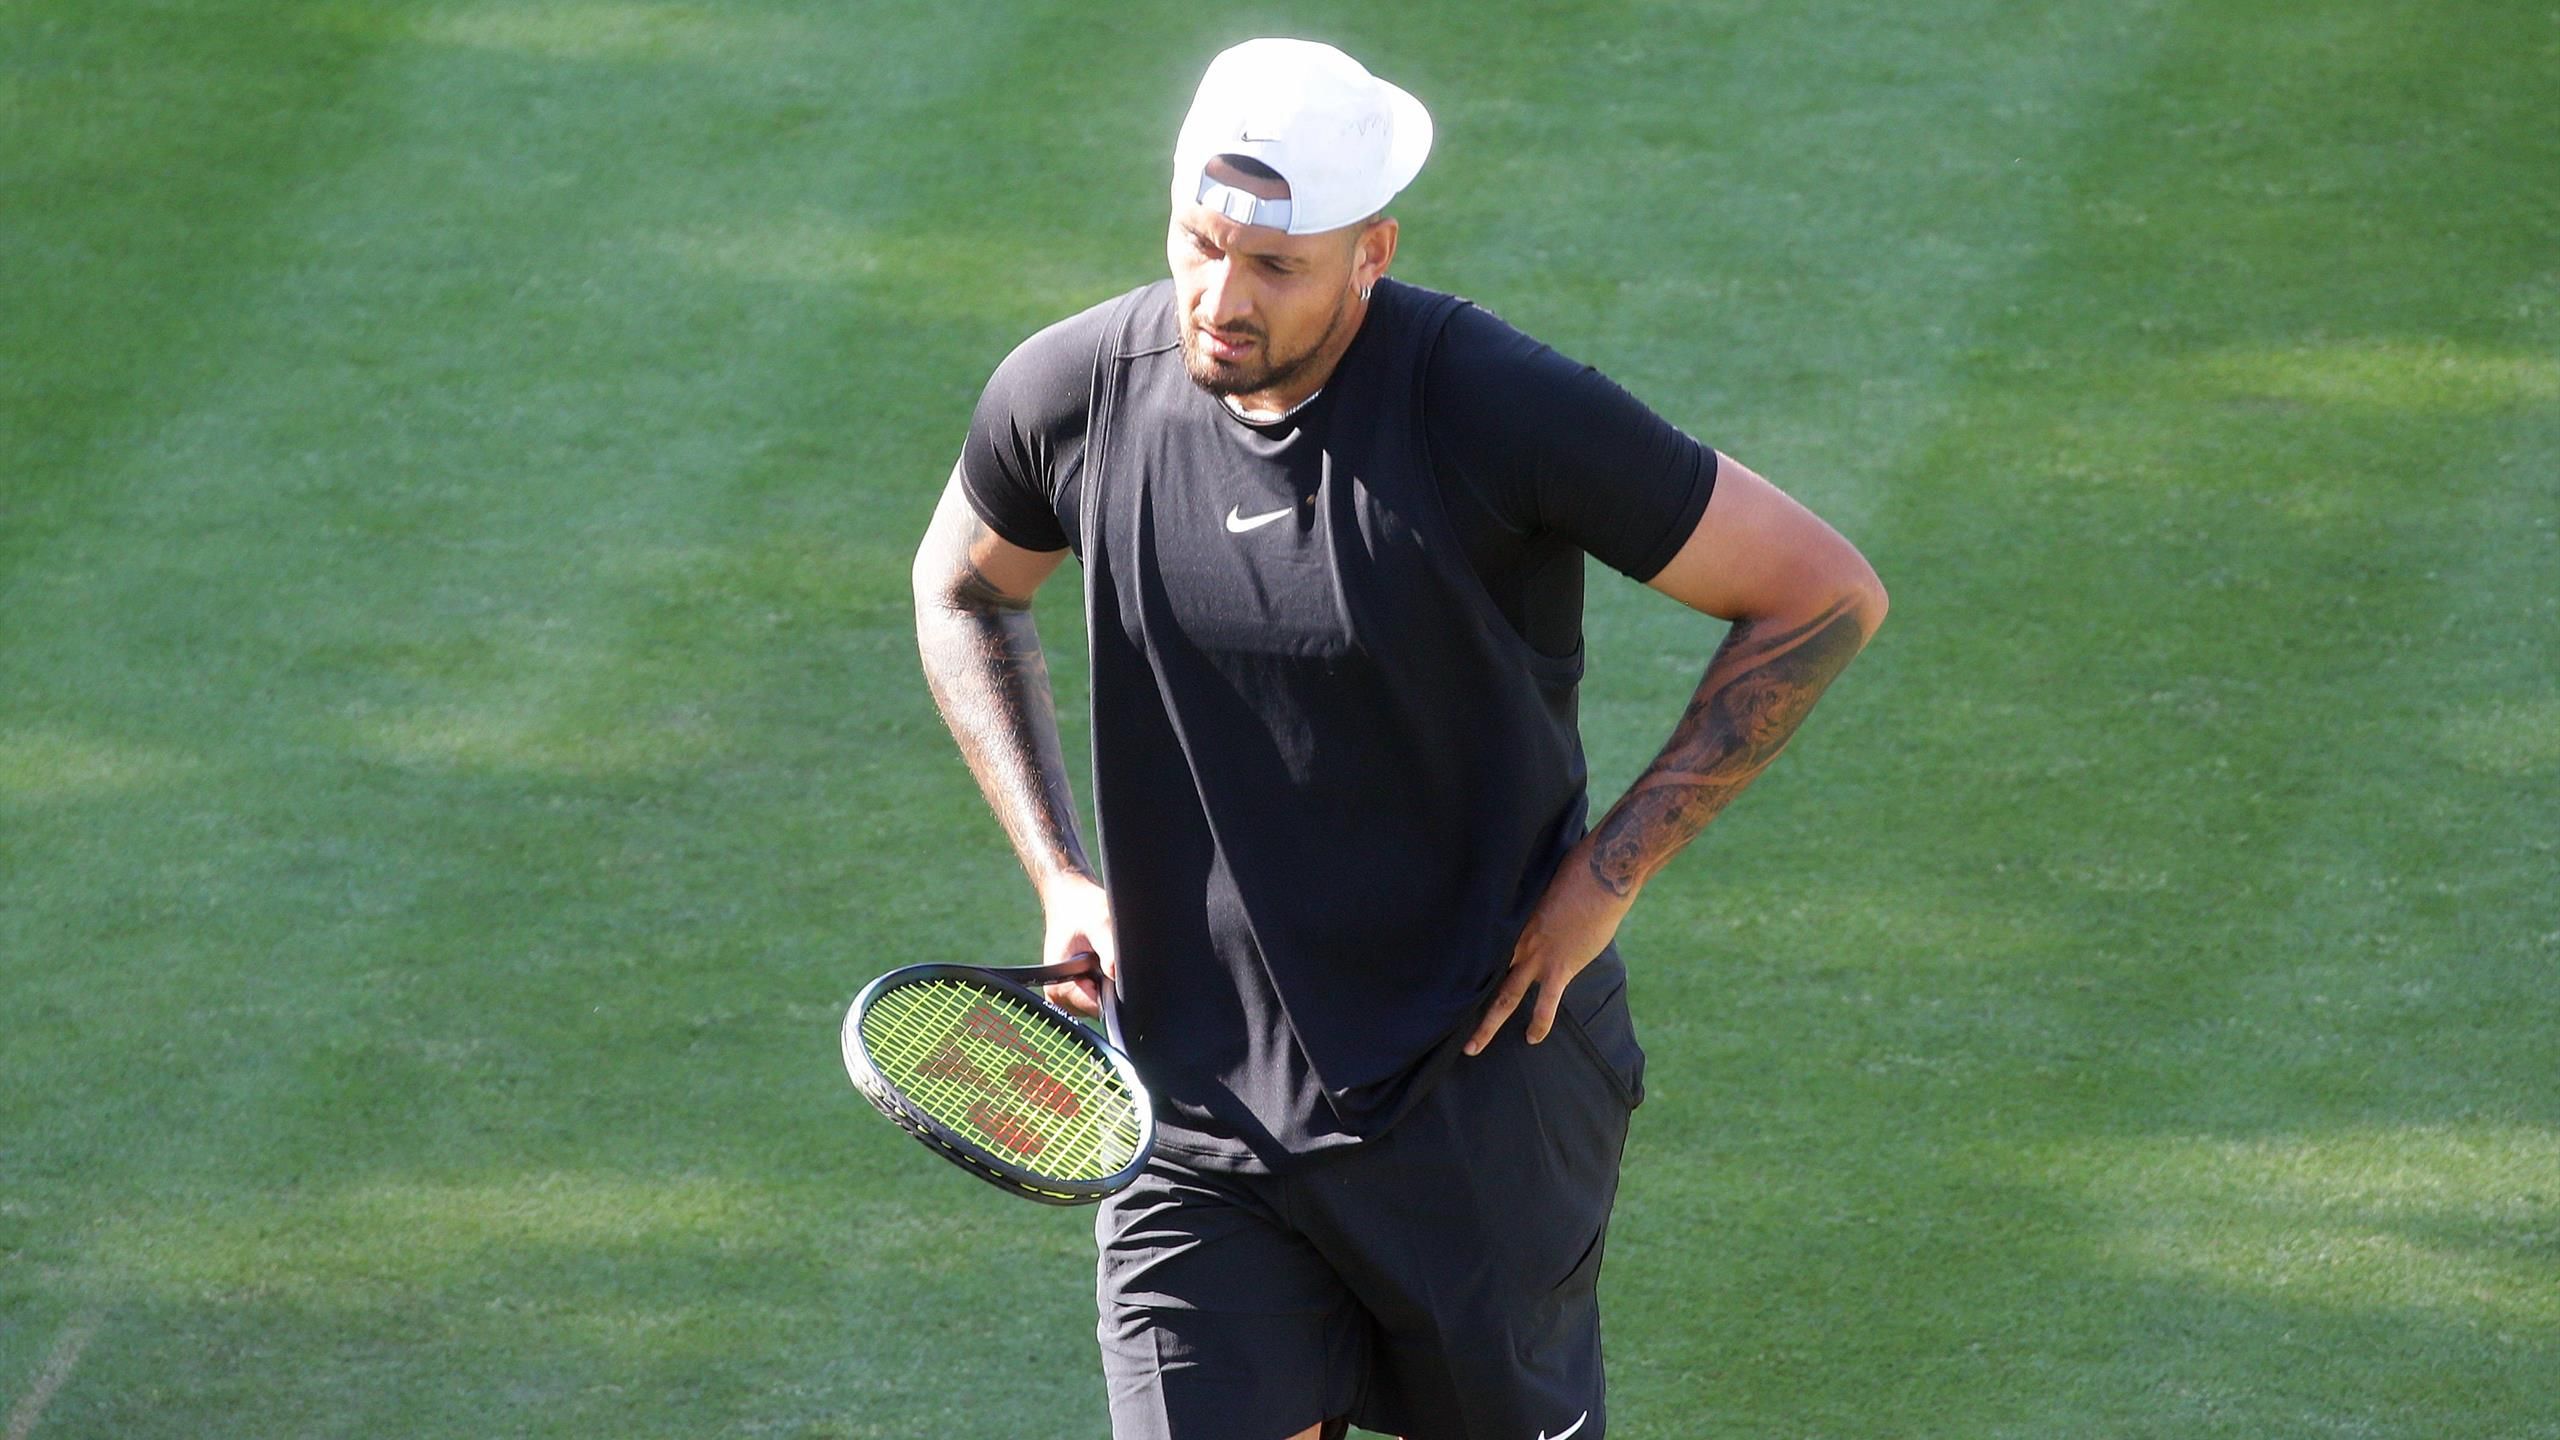 Stuttgart Open Struggling Nick Kyrgios suffers early exit to Wu Yibing on long-awaited return from injury